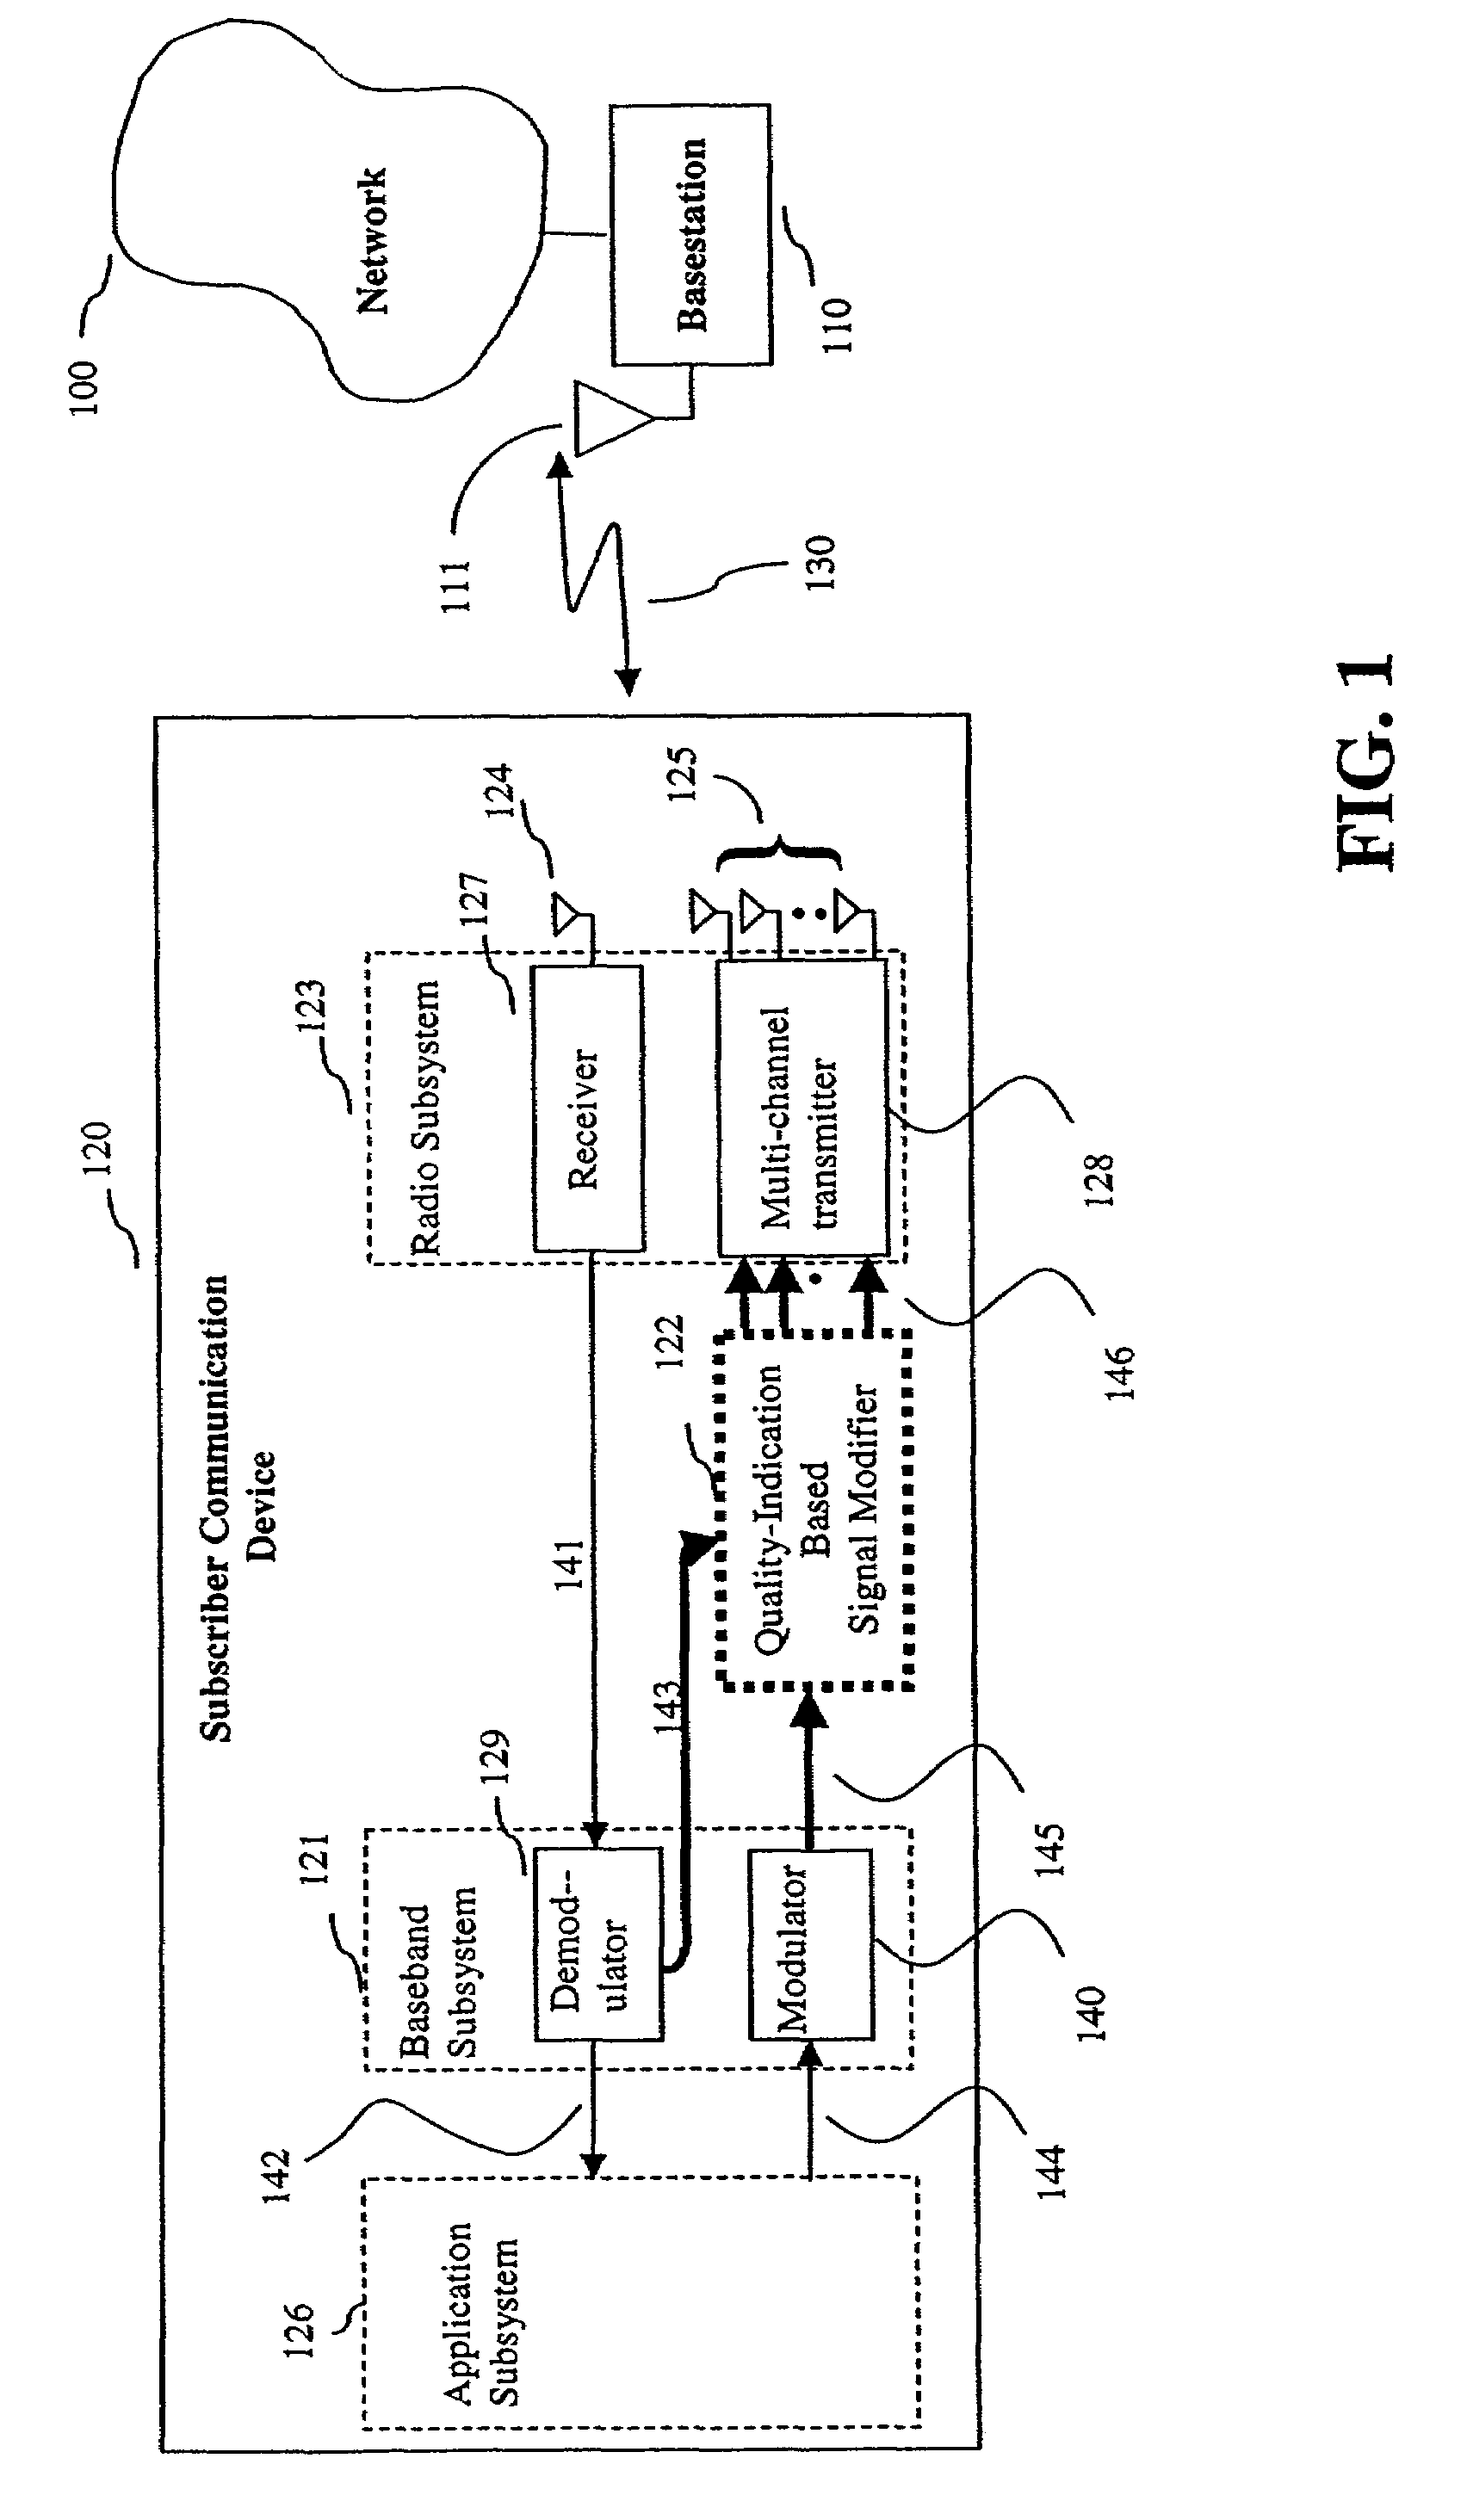 Communication device with smart antenna using a quality-indication signal